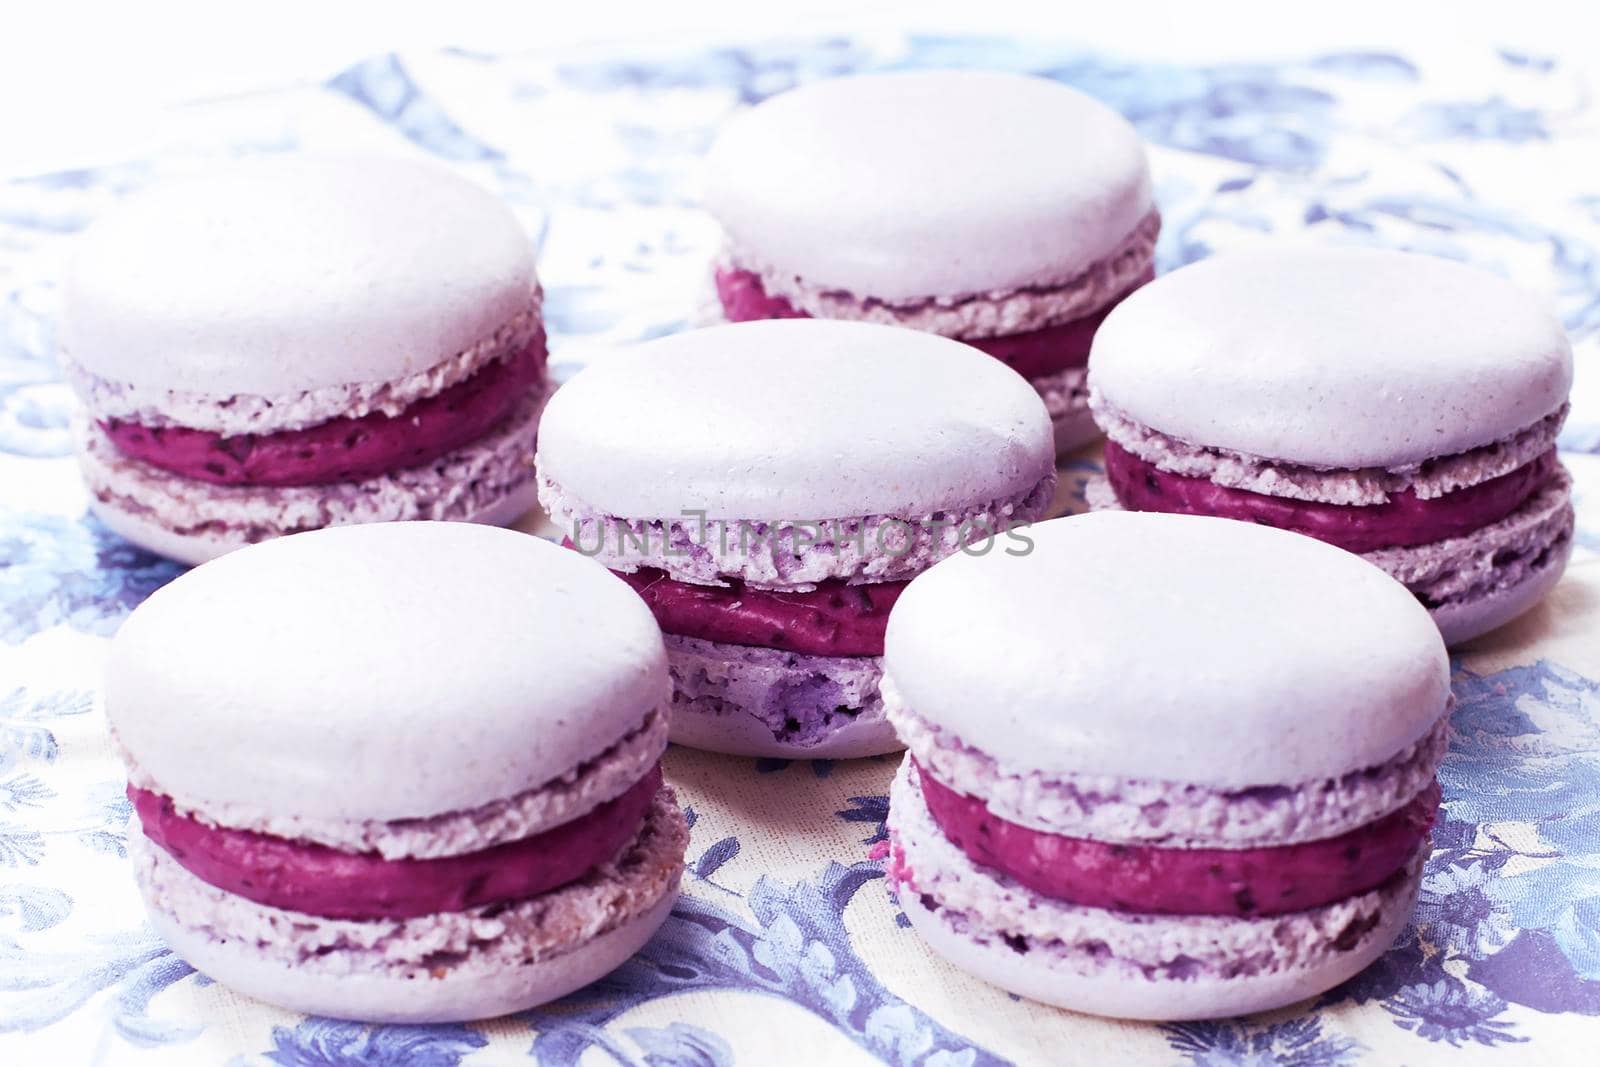 French Macarons with cranberries by Jyliana